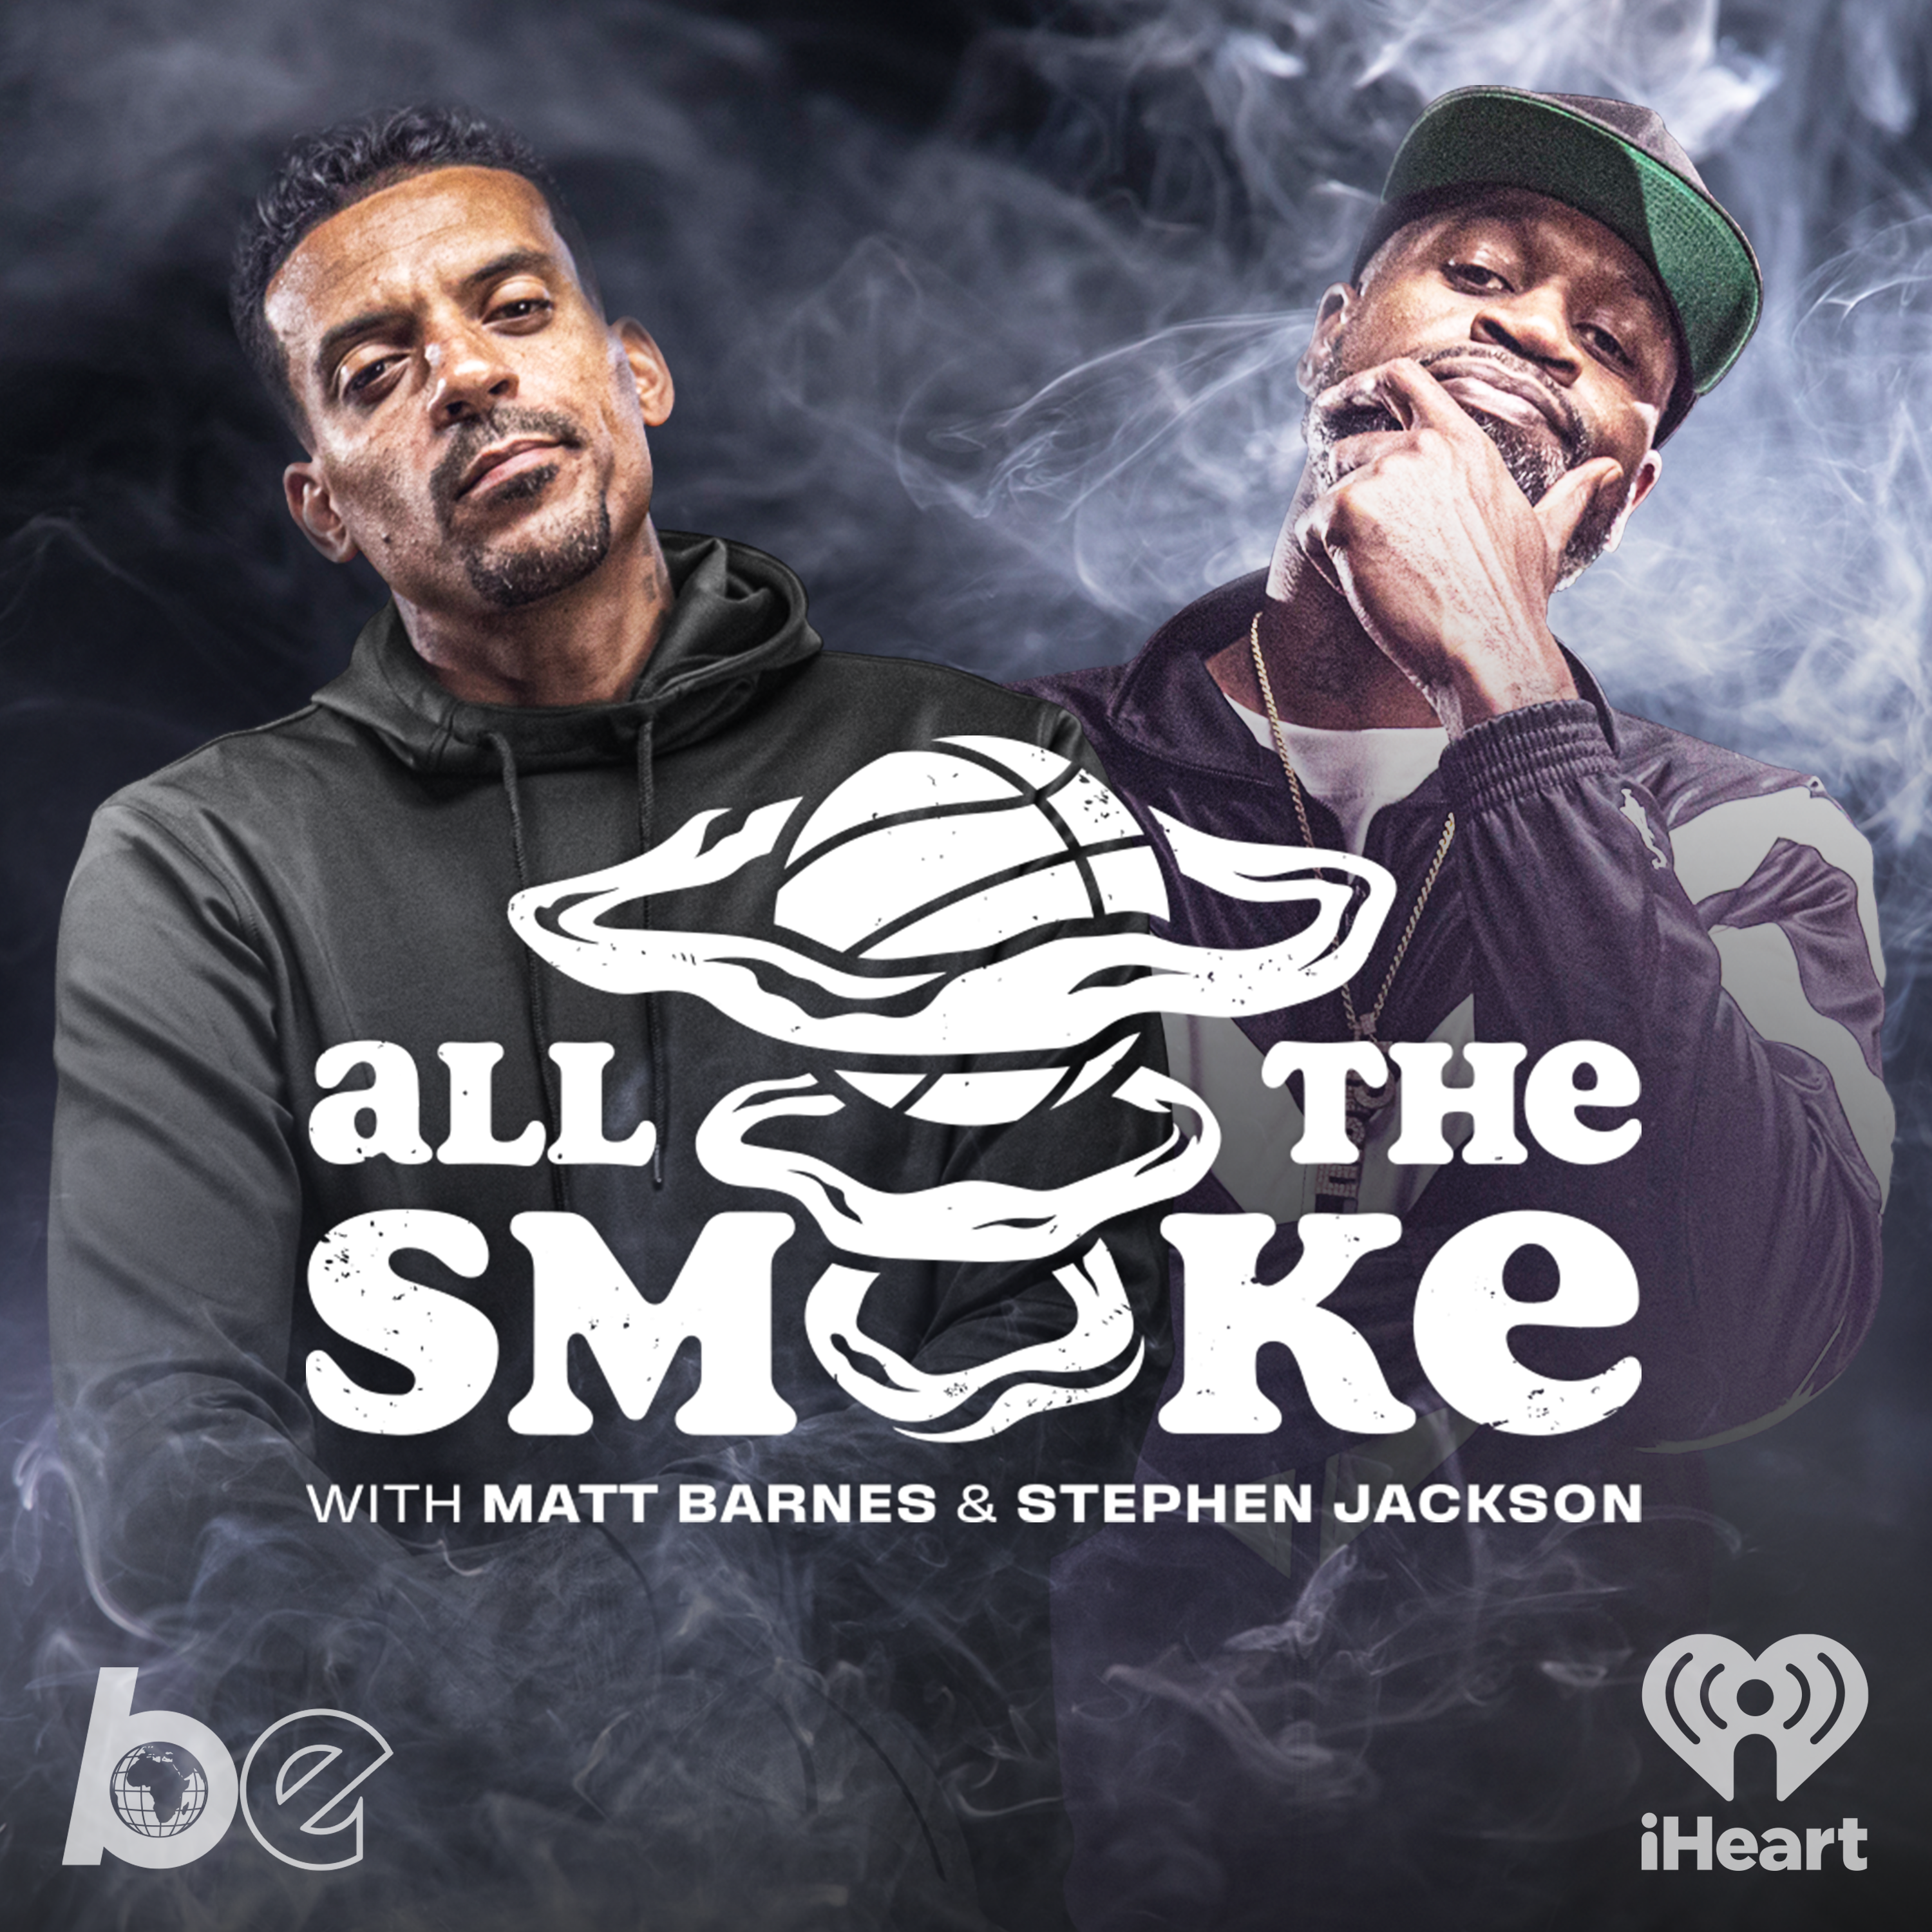 Bradley Beal | Ep 40 | ALL THE SMOKE Full Episode | #StayHome with SHOWTIME Basketball